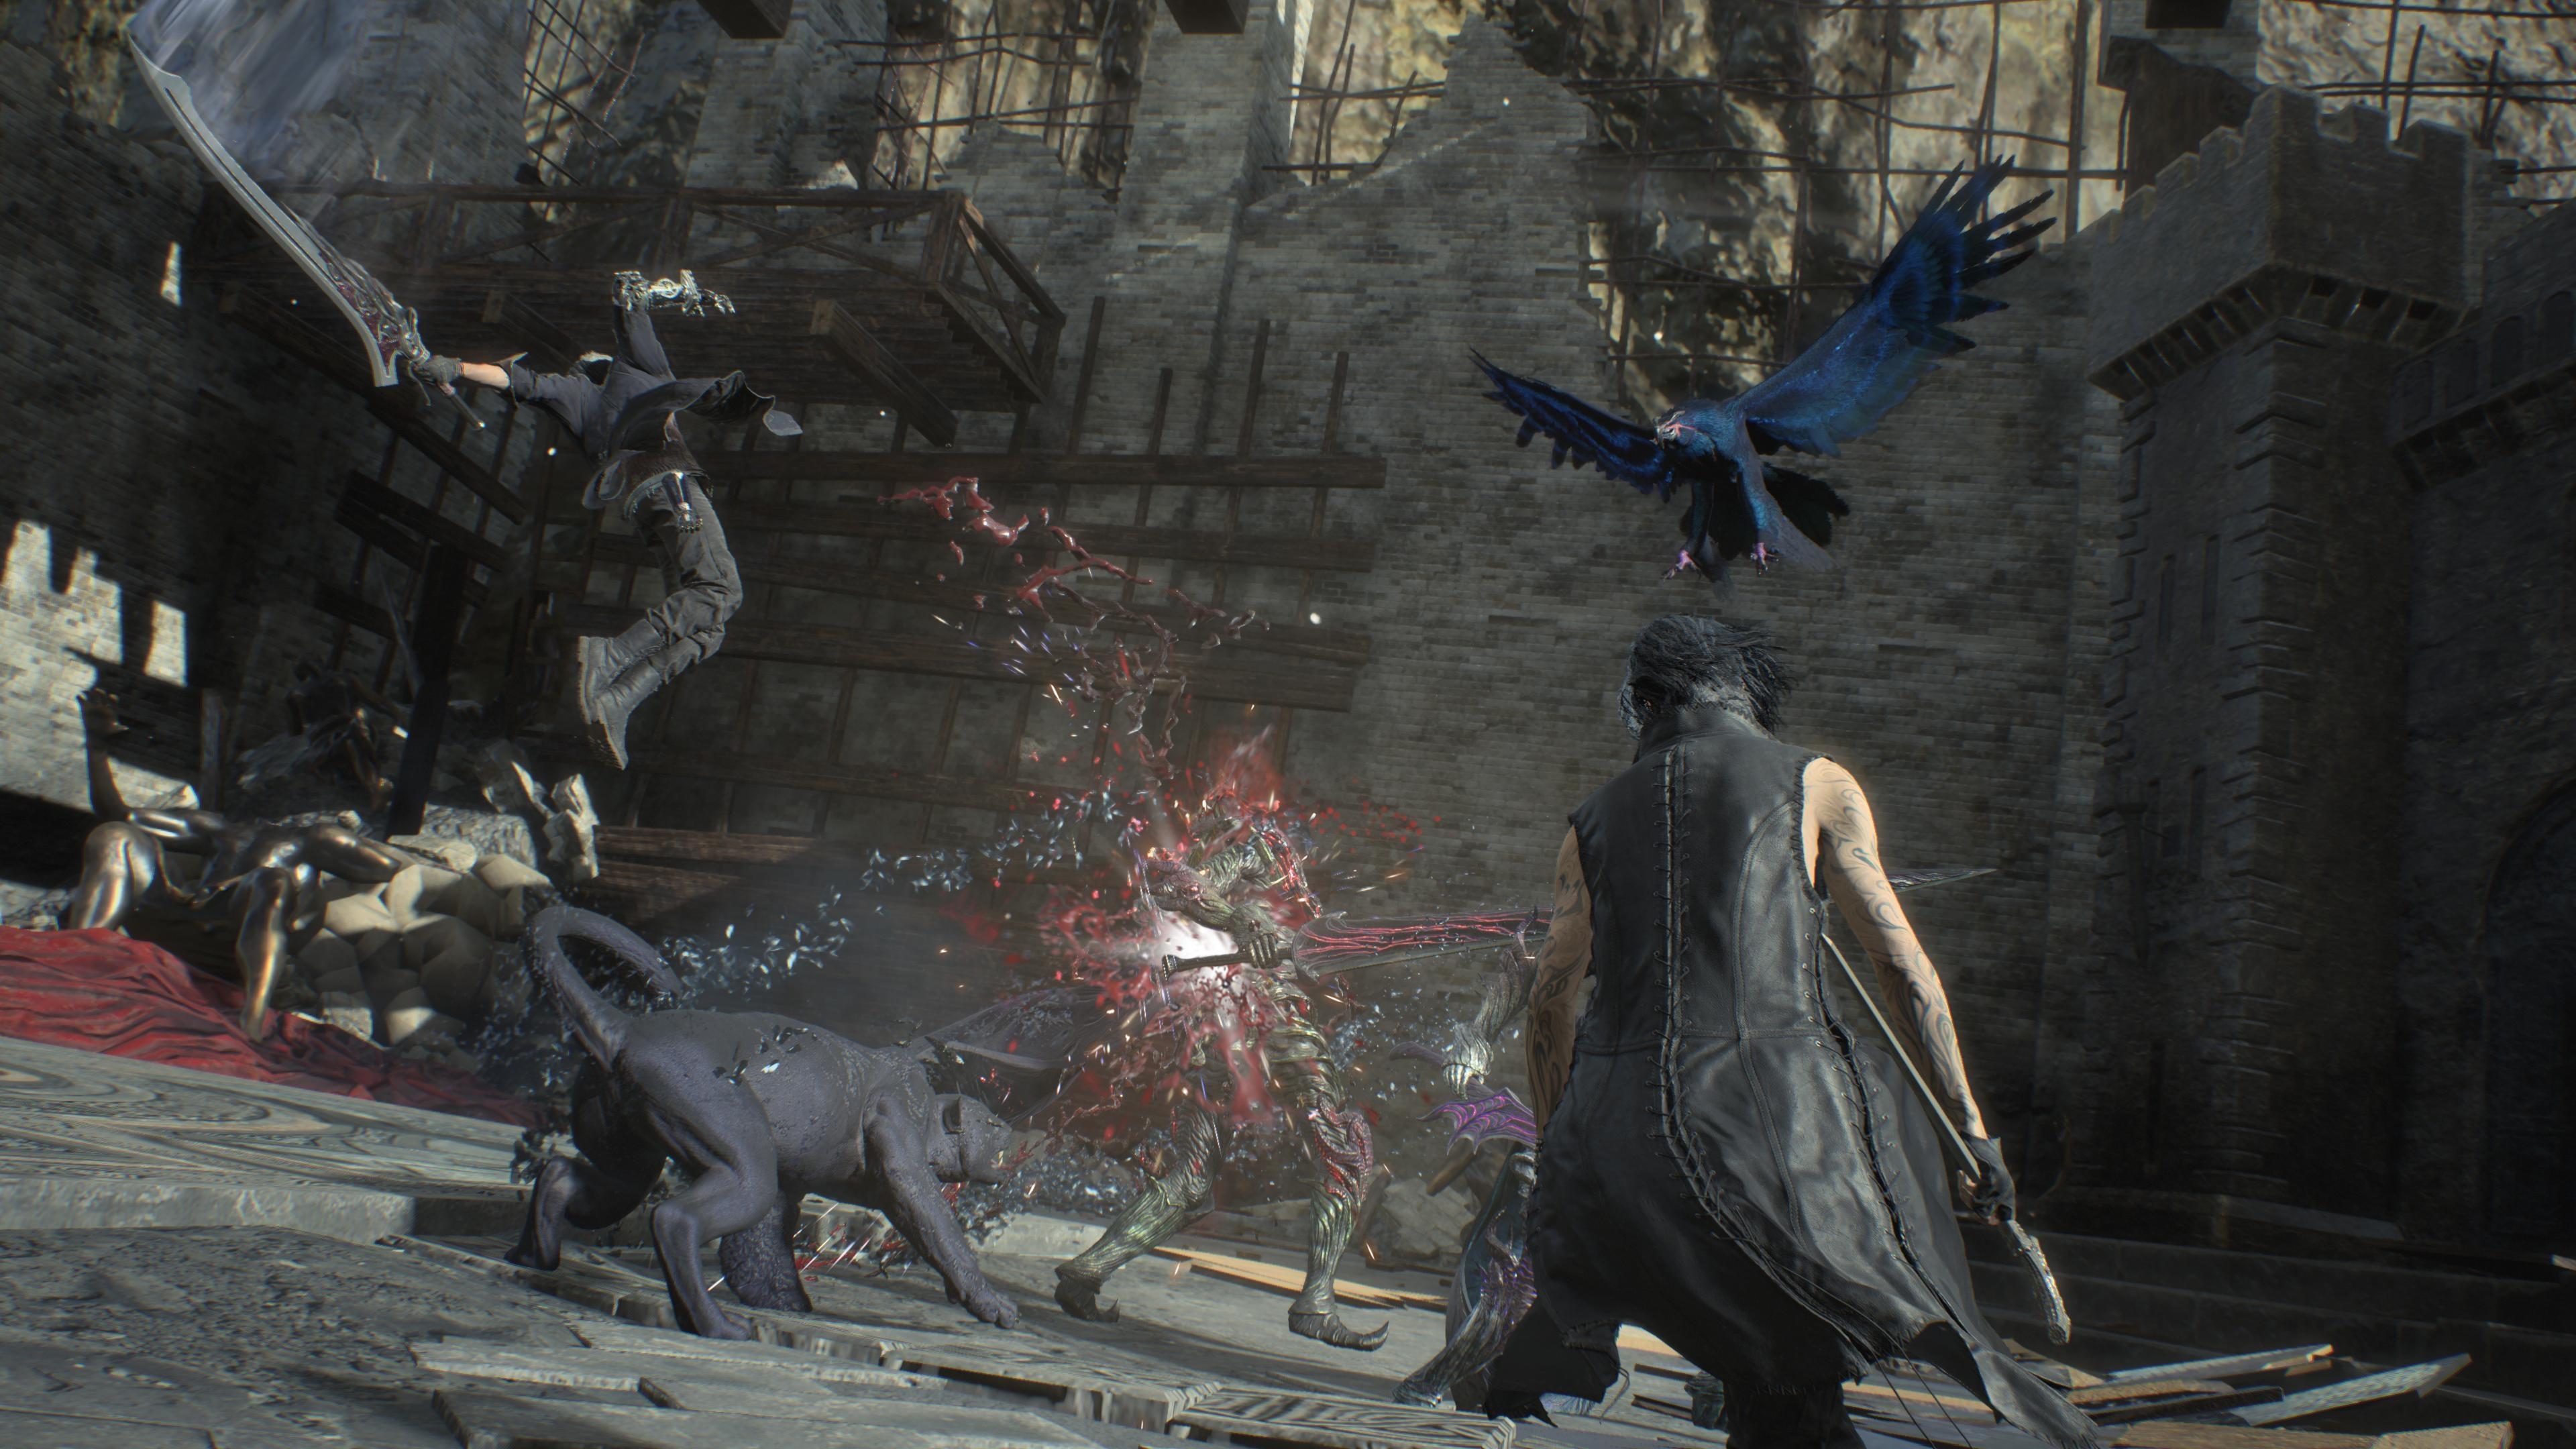 Devil May Cry 5 4k Ultra HD Wallpaper. Background Imagex2160